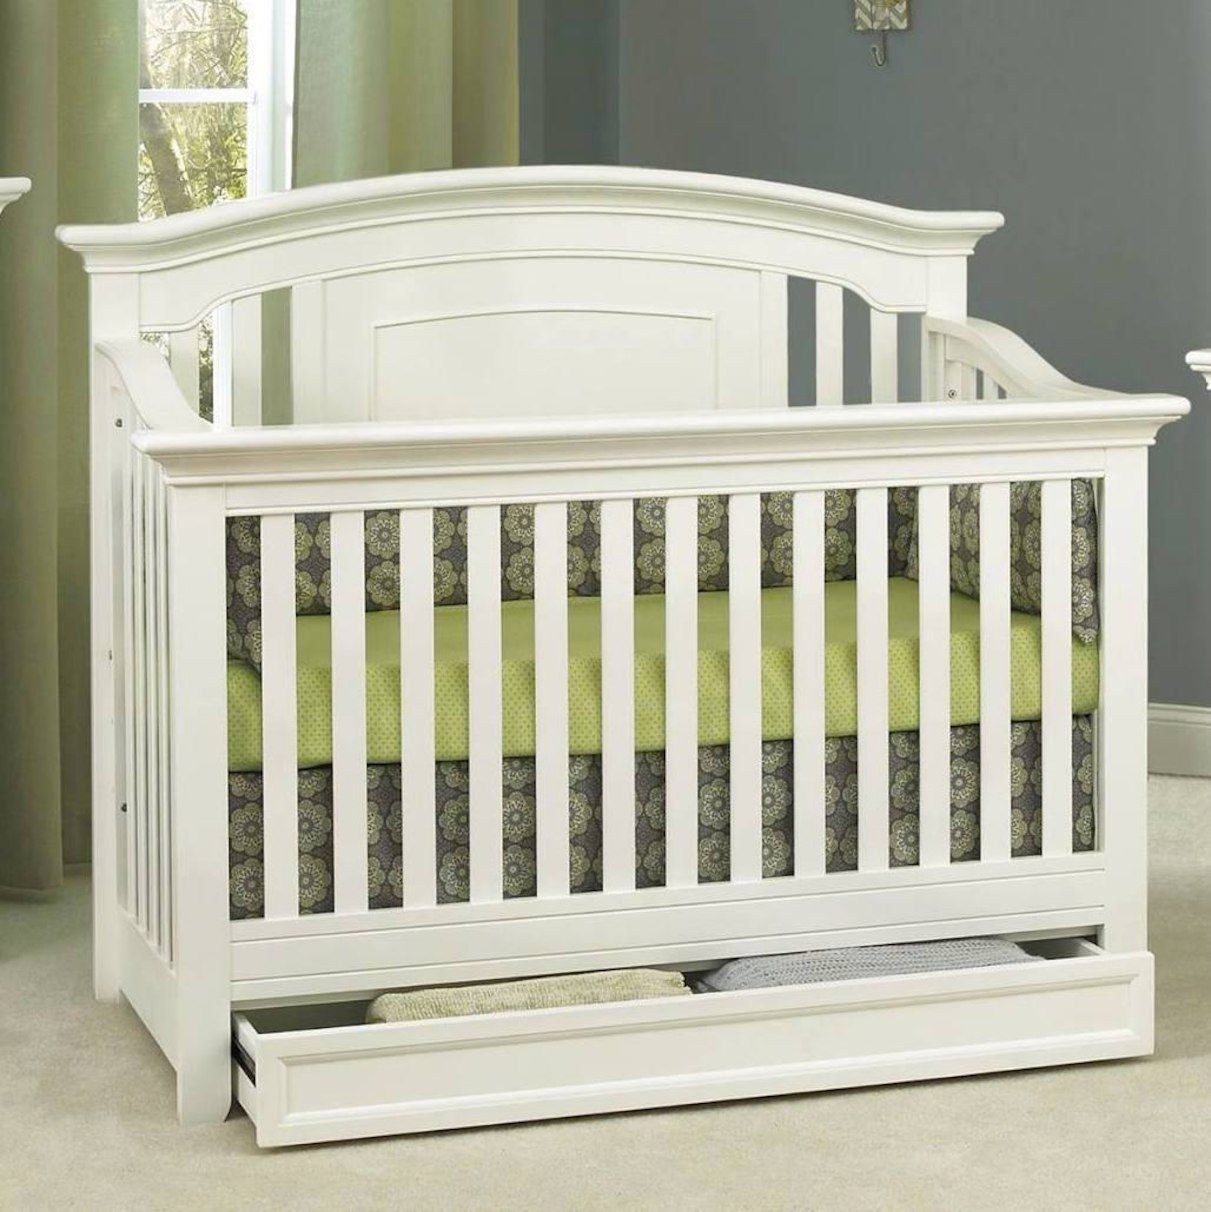 Baby cache harbor 4 in 1 convertible crib with storage